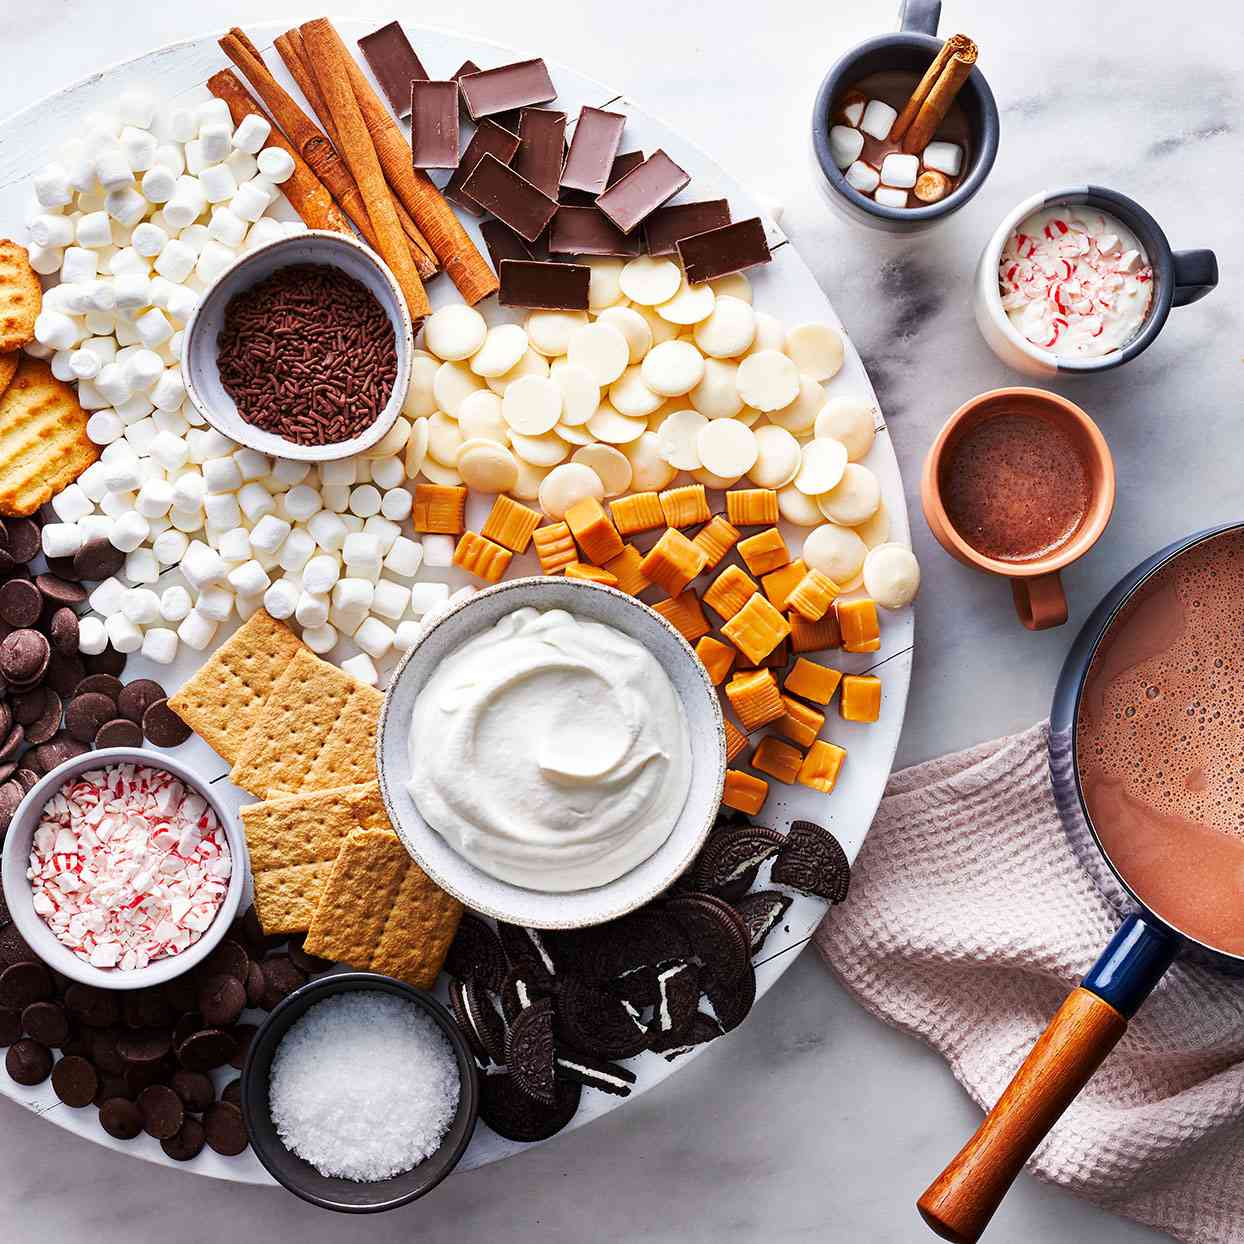 What to Eat With Hot Chocolate? 